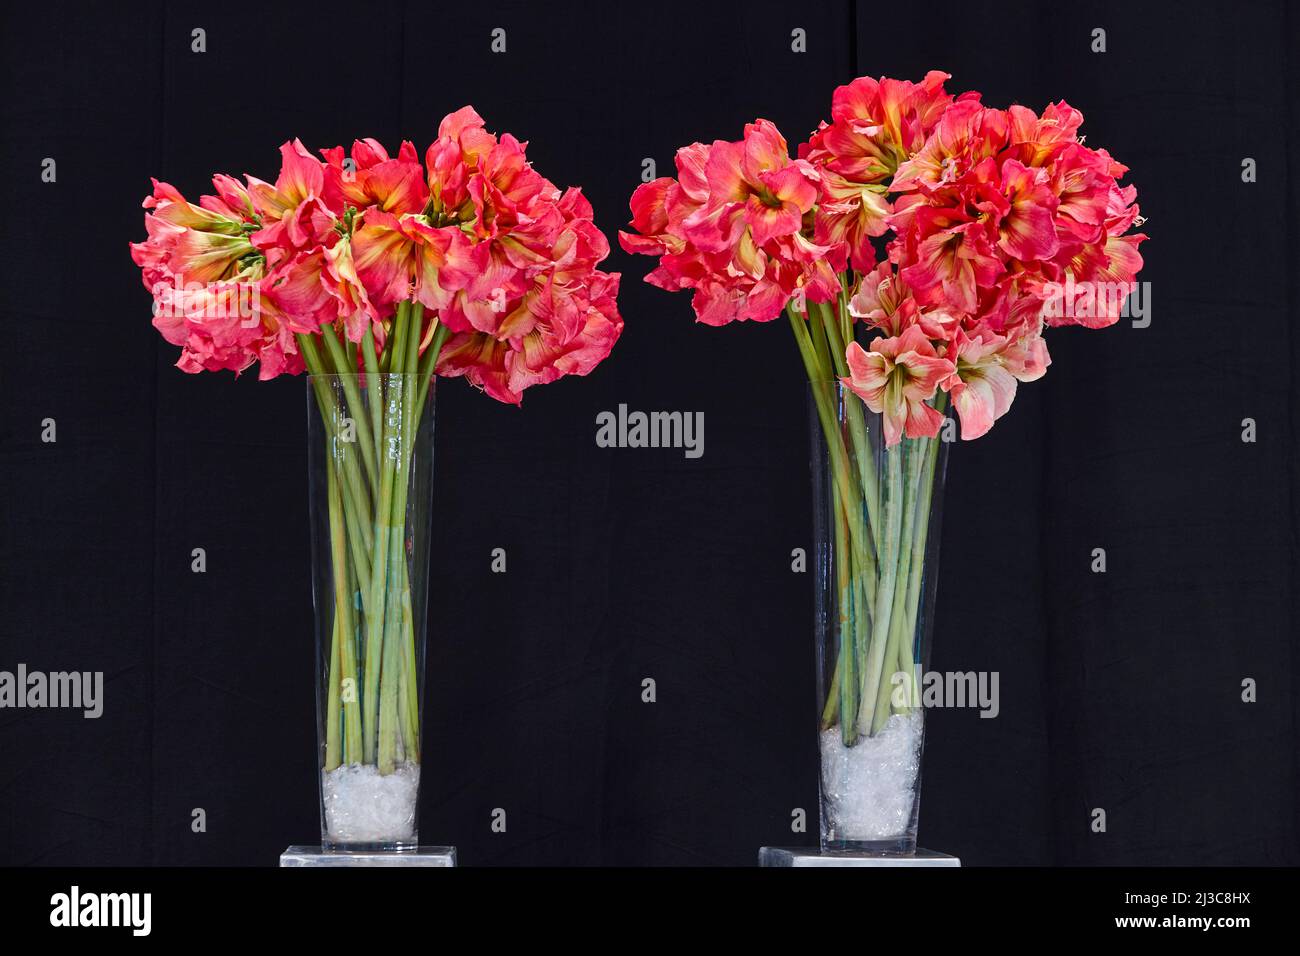 Gladiolus plants and flowers on a cristal jars. Cut flowers Stock Photo